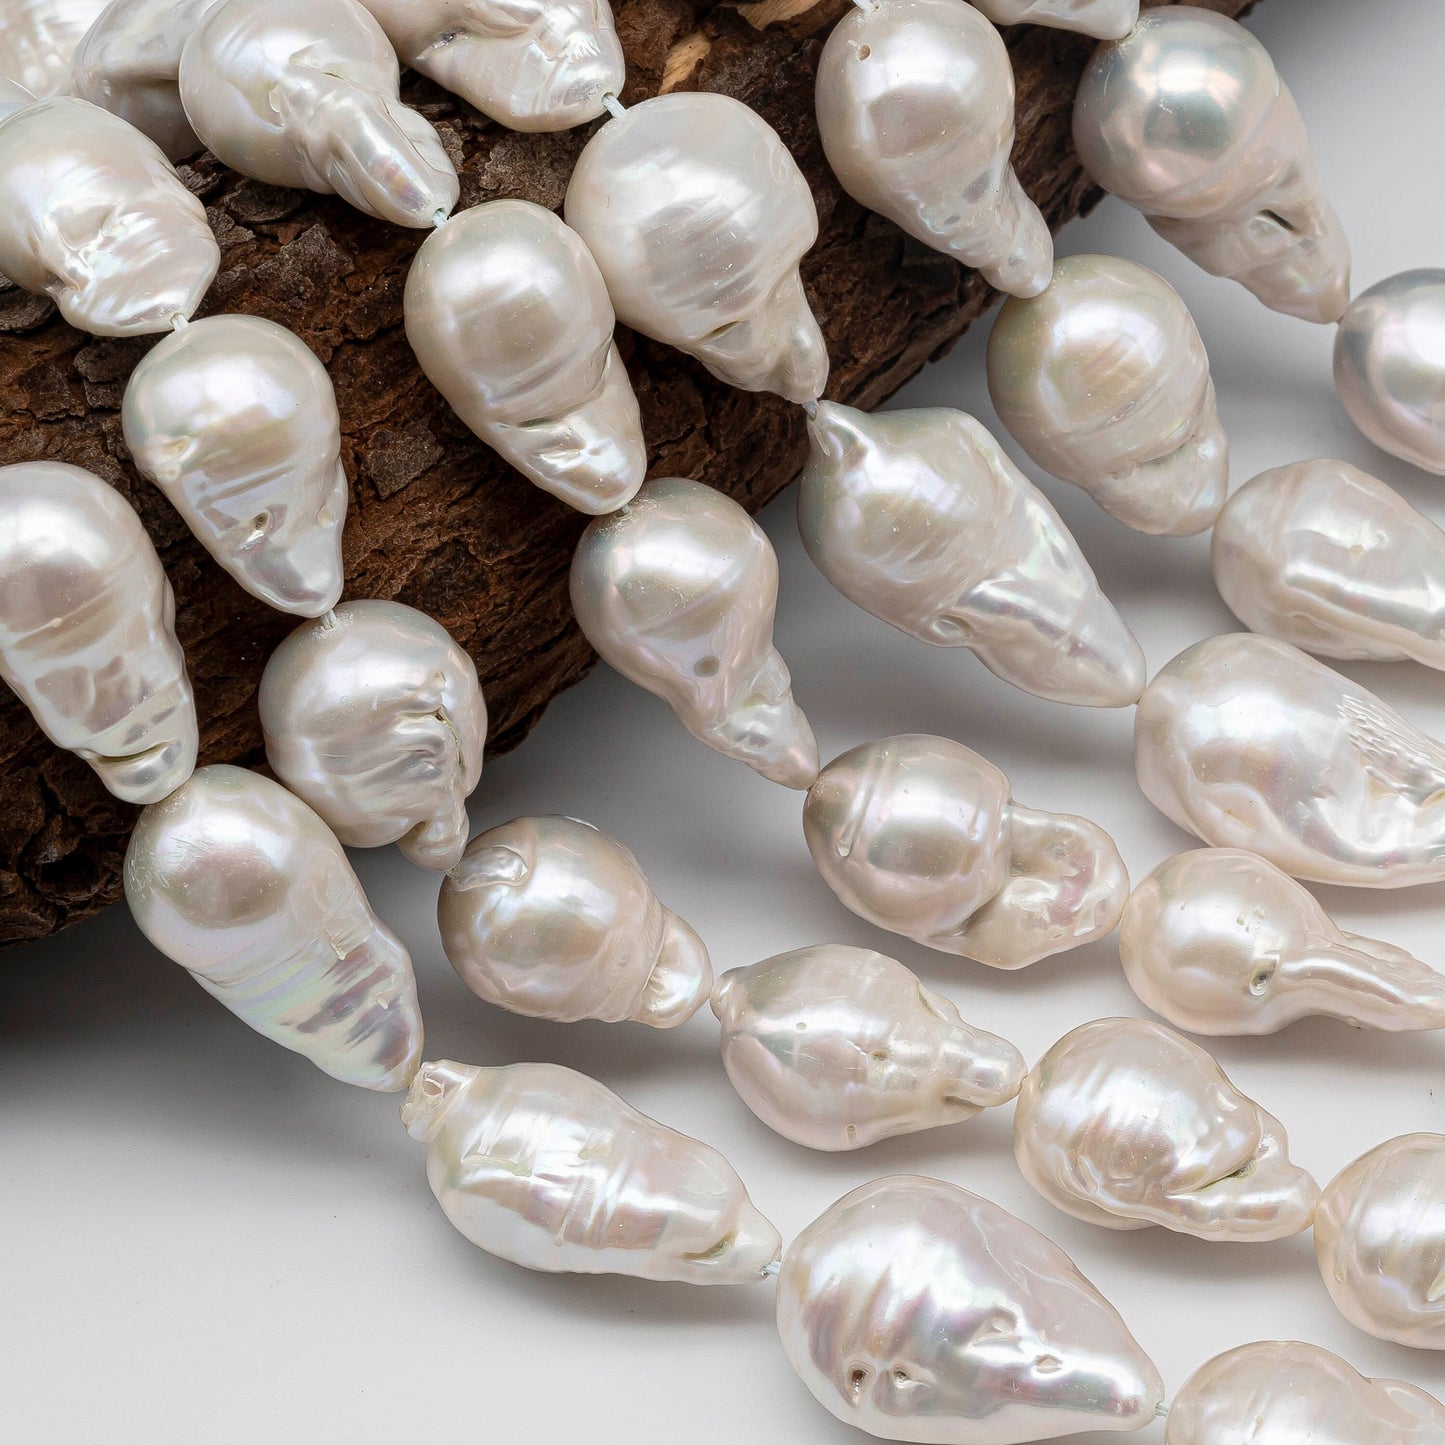 12-16mm Freshwater Baroque Pearl White Color with Nice Luster, 12x17mm Wide to 16x28mm Long, SKU # 1419BA